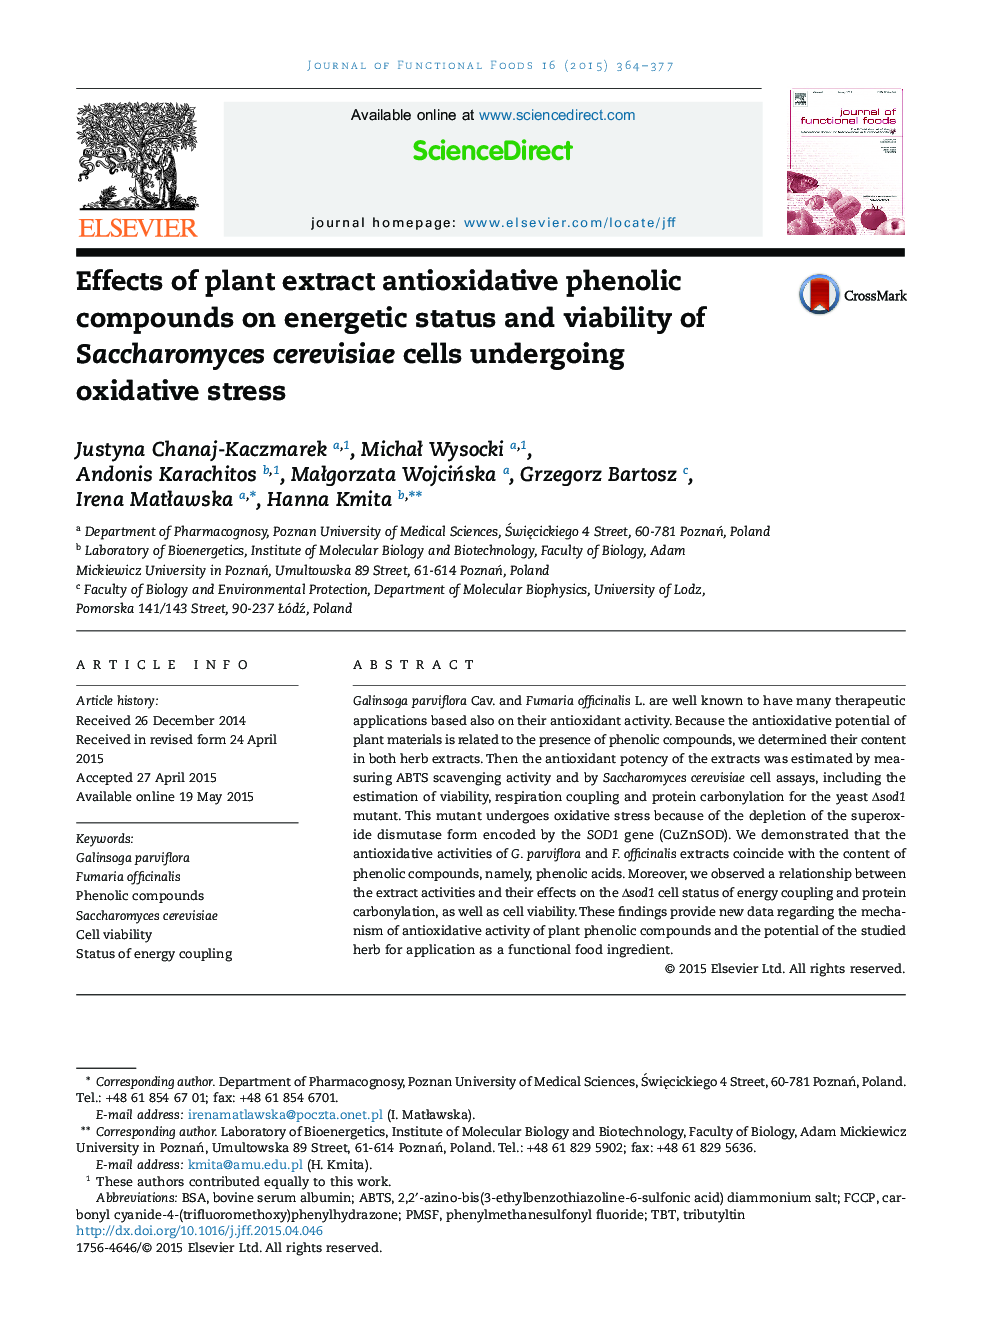 Effects of plant extract antioxidative phenolic compounds on energetic status and viability of Saccharomyces cerevisiae cells undergoing oxidative stress